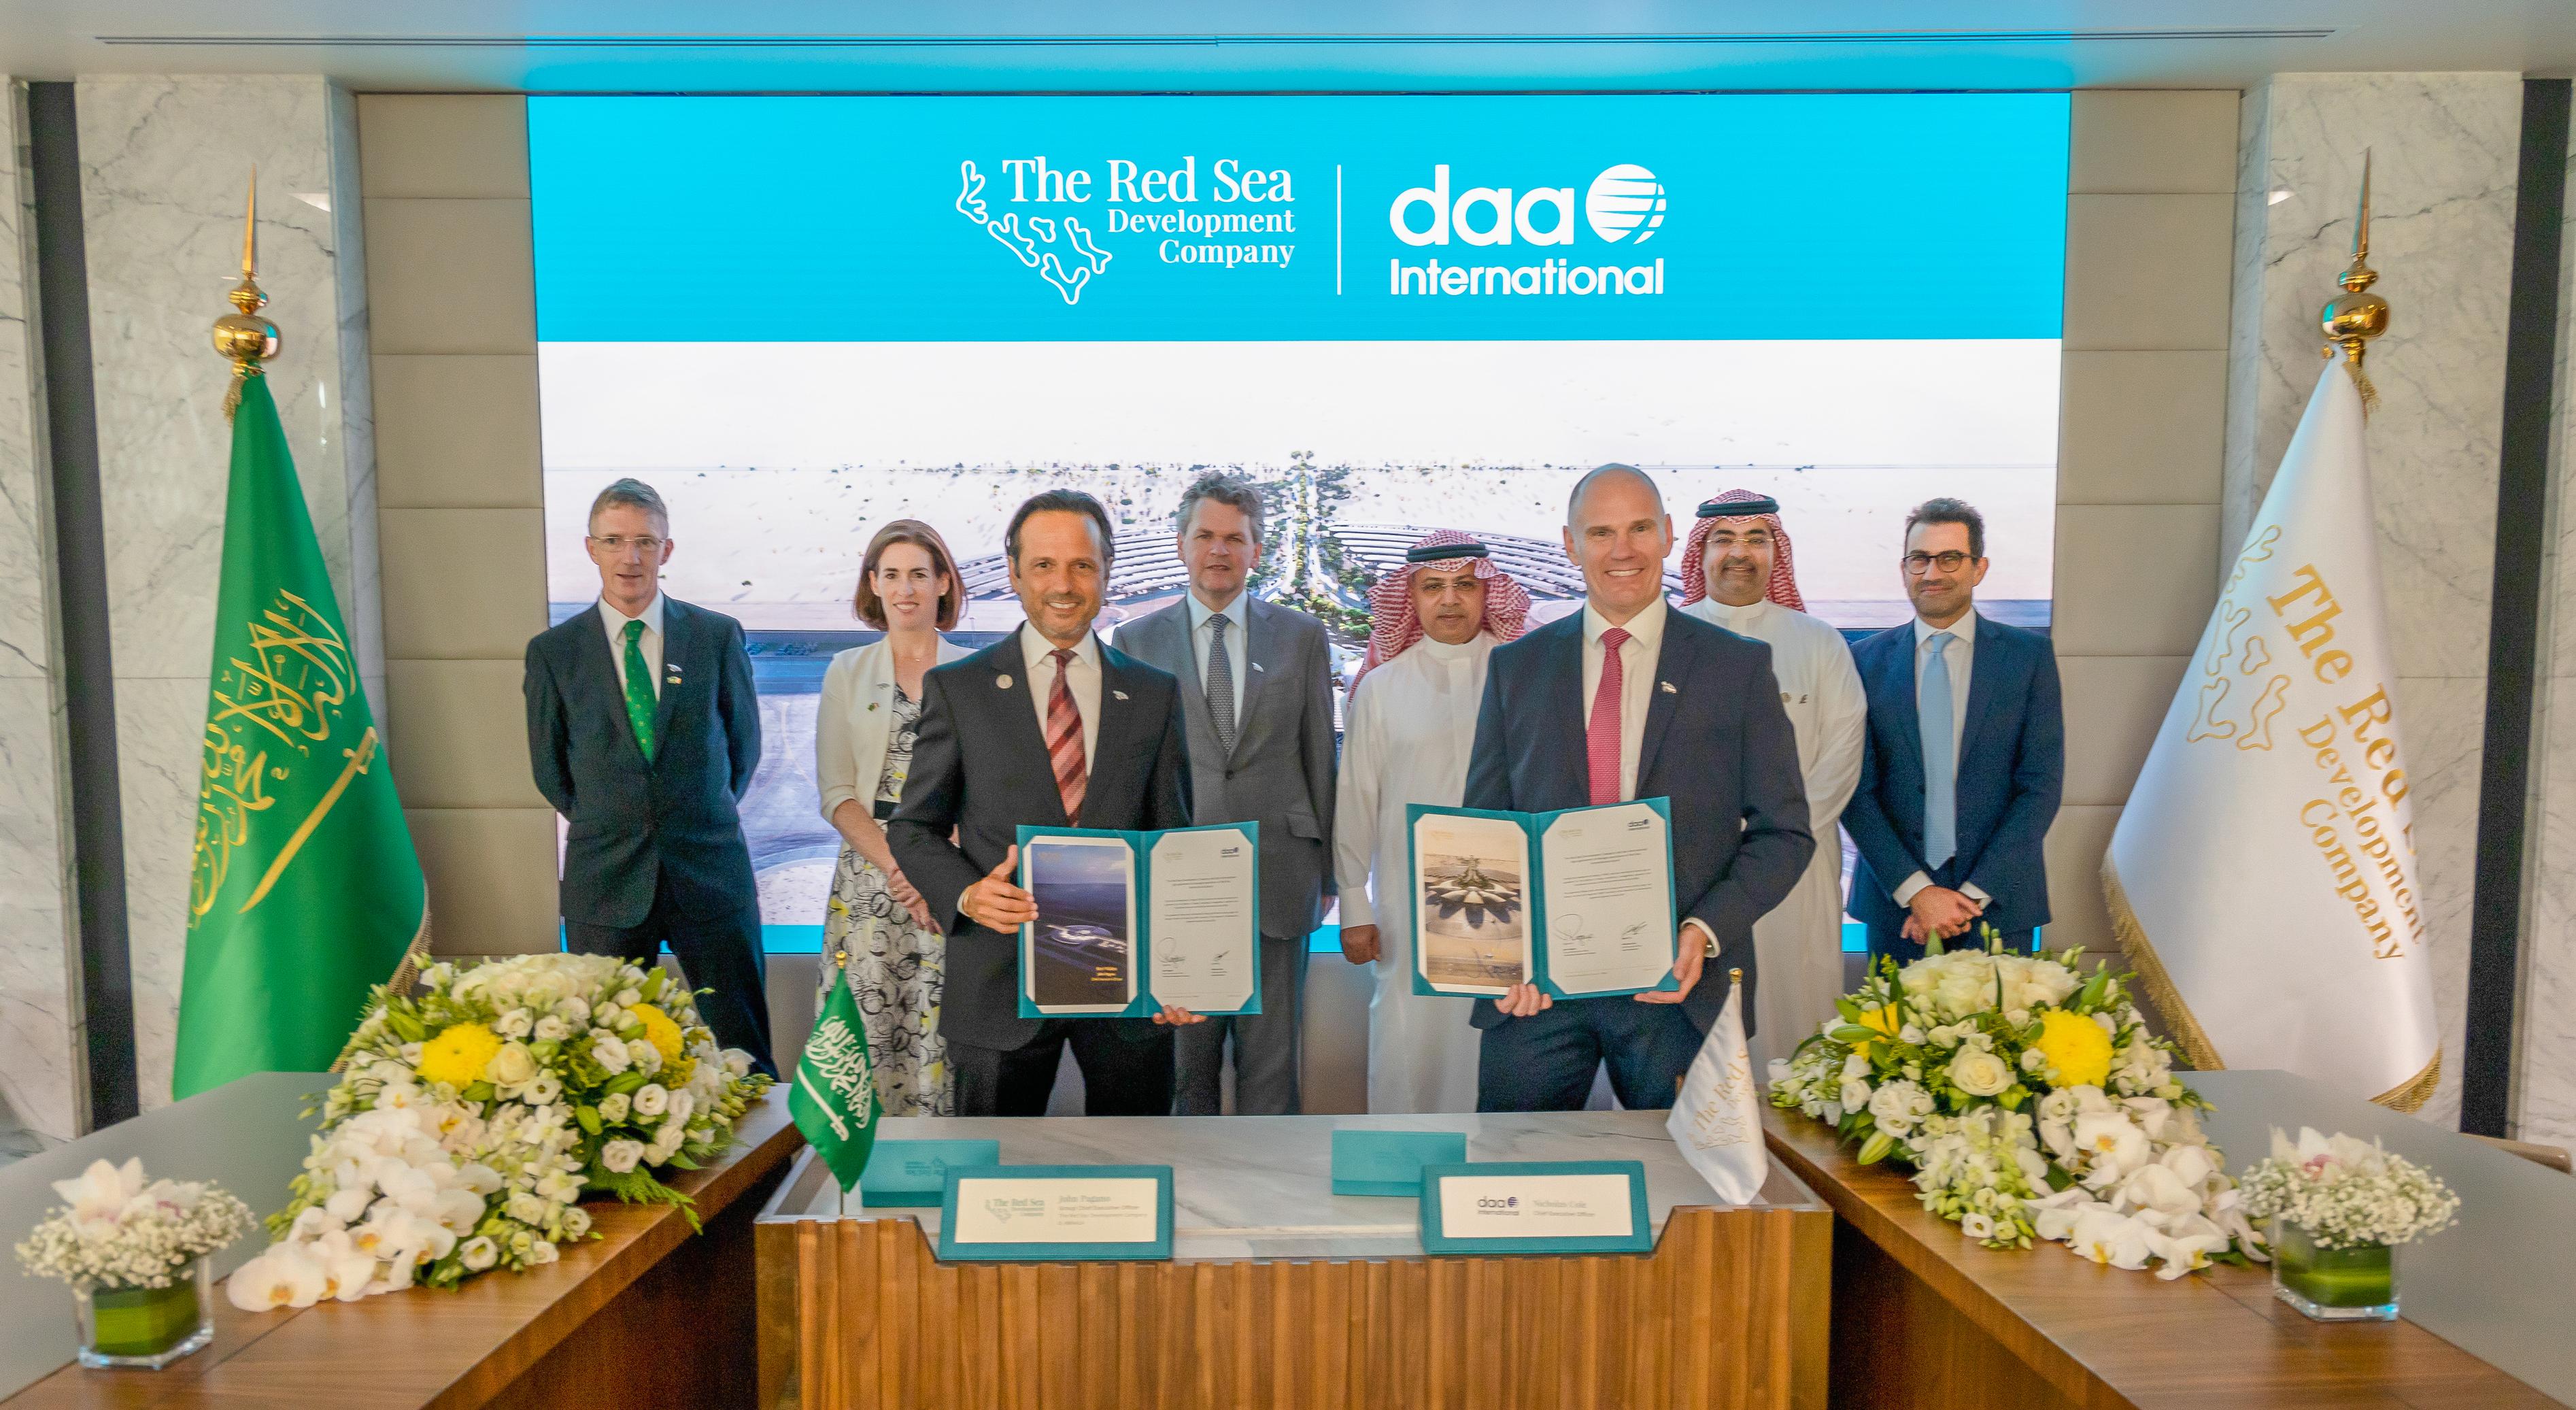 Red Sea Global welcomes Irish government to Riyadh as it signs SAR 1 billion deal with daa International